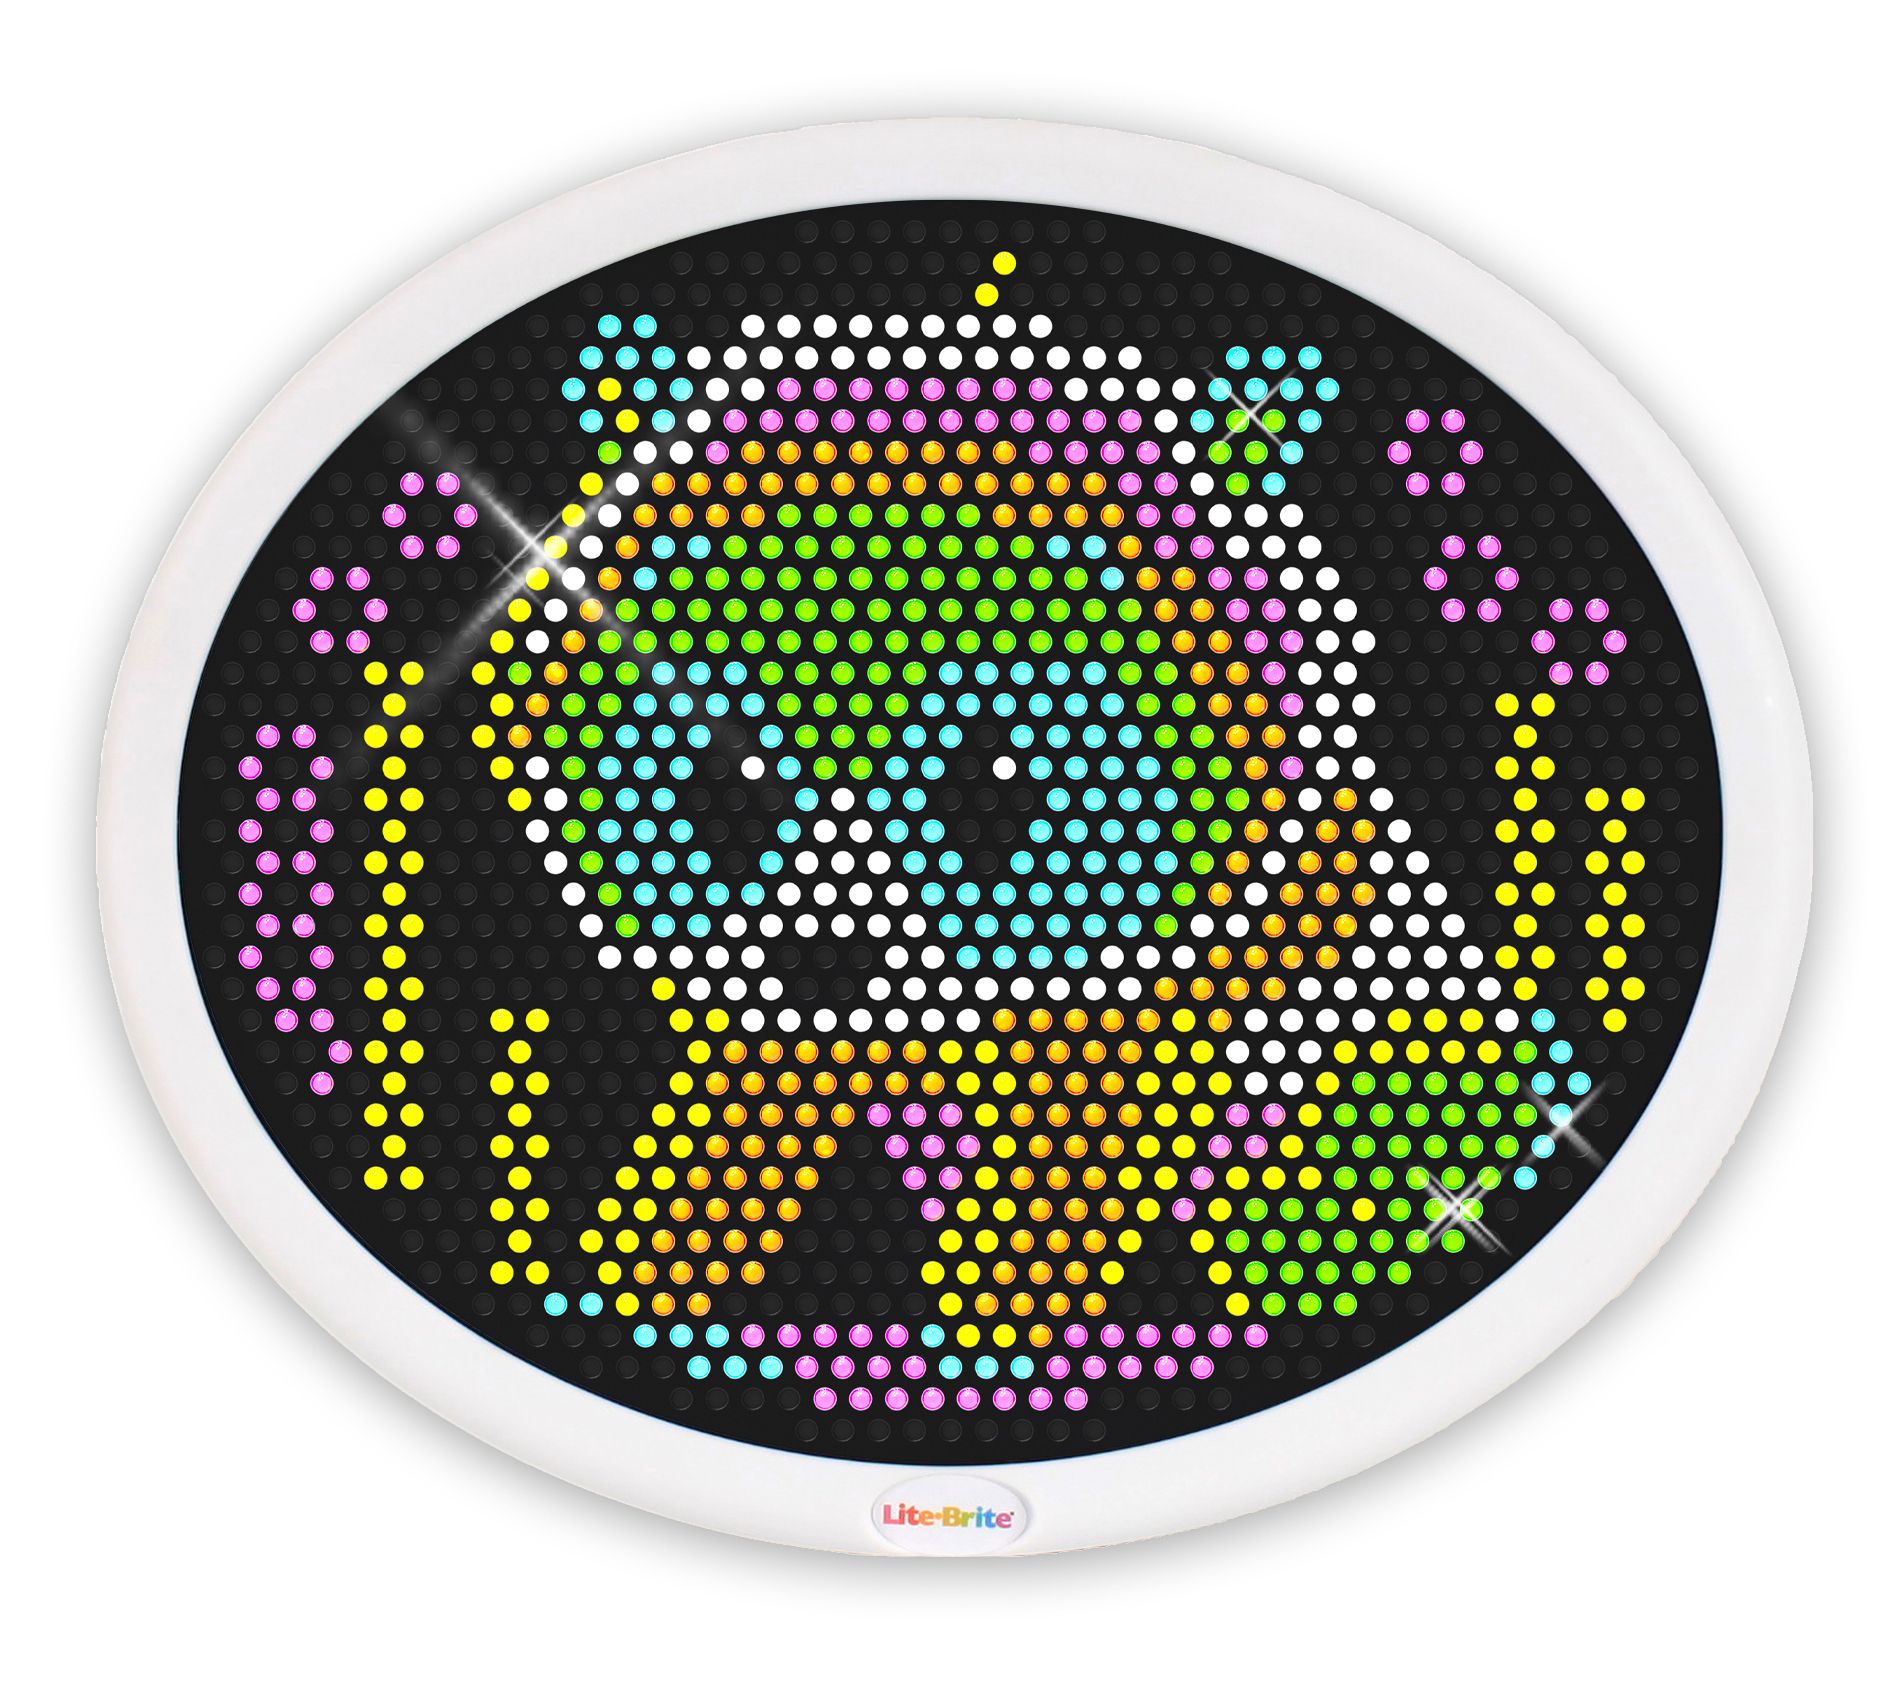 Lite Brite Oval HD Deluxe Edition with 900 Pegs